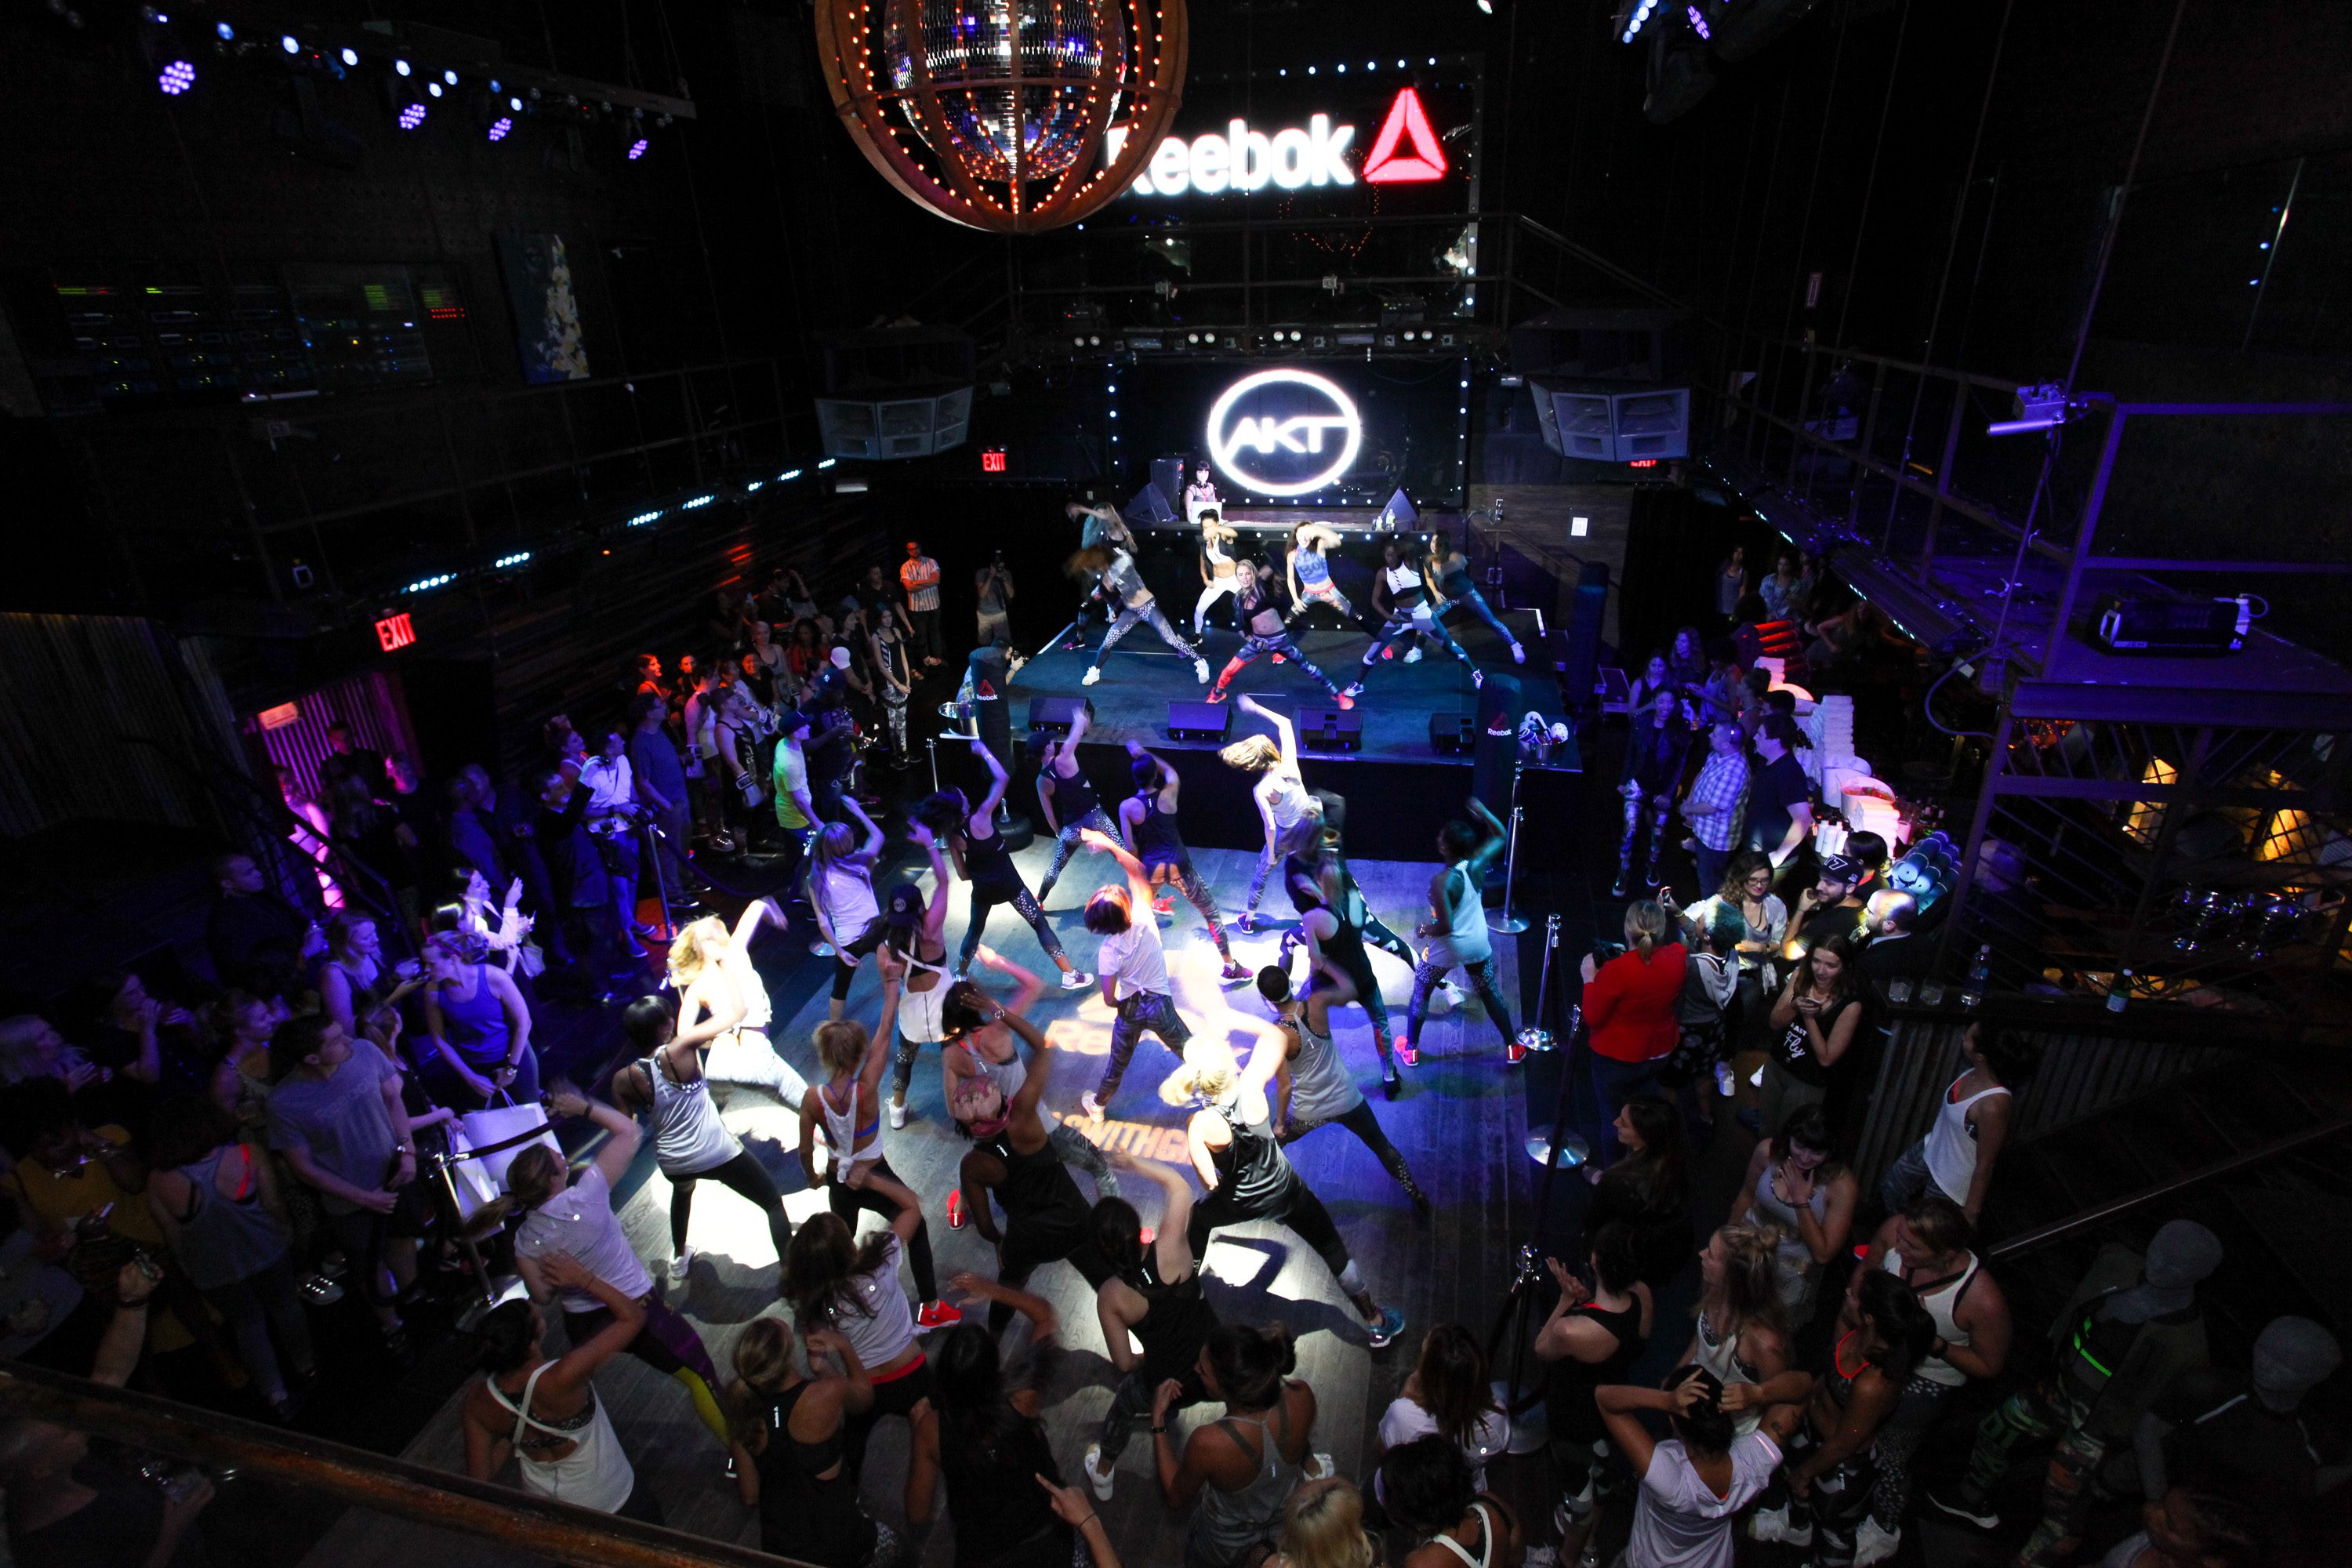 NEW YORK, NY - SEPTEMBER 16: Guests participate in the AKT in Motion Class at Marquee on September 16, 2015 in New York City. (Photo by Donald Bowers/Getty Images for Reebok)